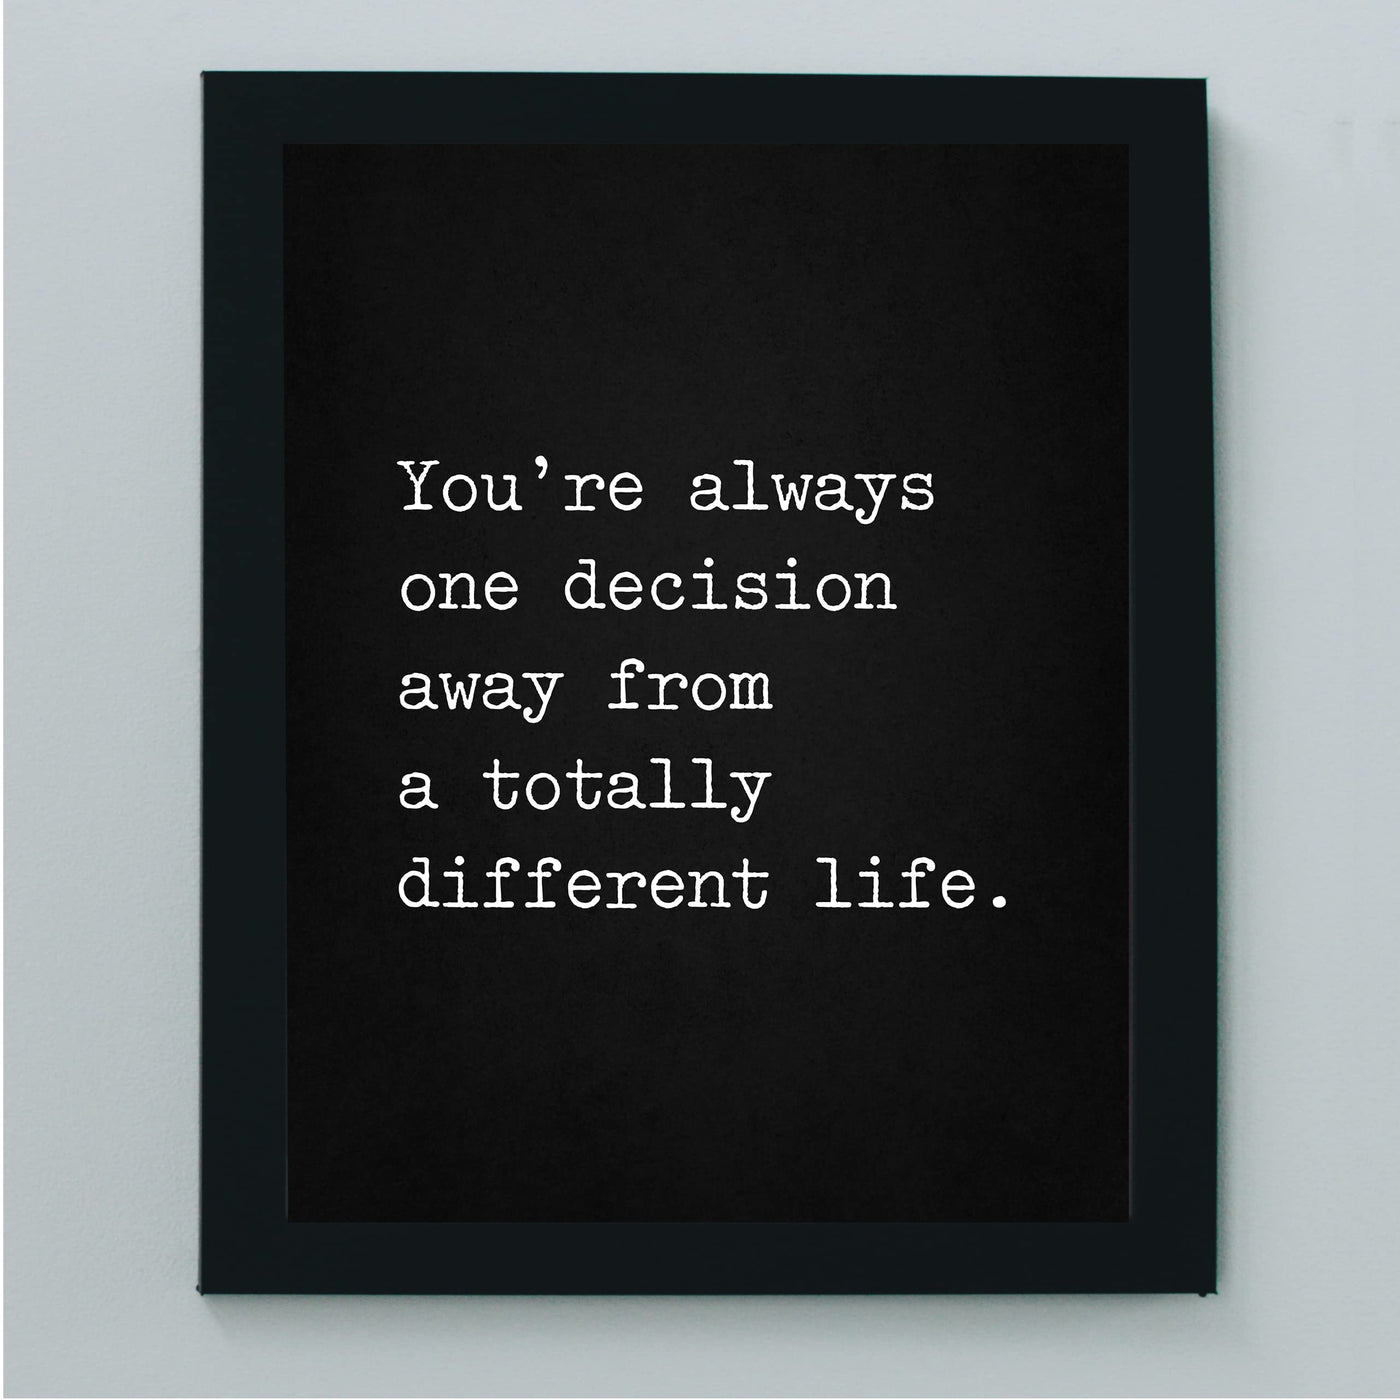 Always One Decision Away from Different Life-Motivational Quotes Wall Art -8 x 10" Modern Typographic Design Print -Ready to Frame. Inspirational Home-Office-Classroom Decor. Great Reminder!